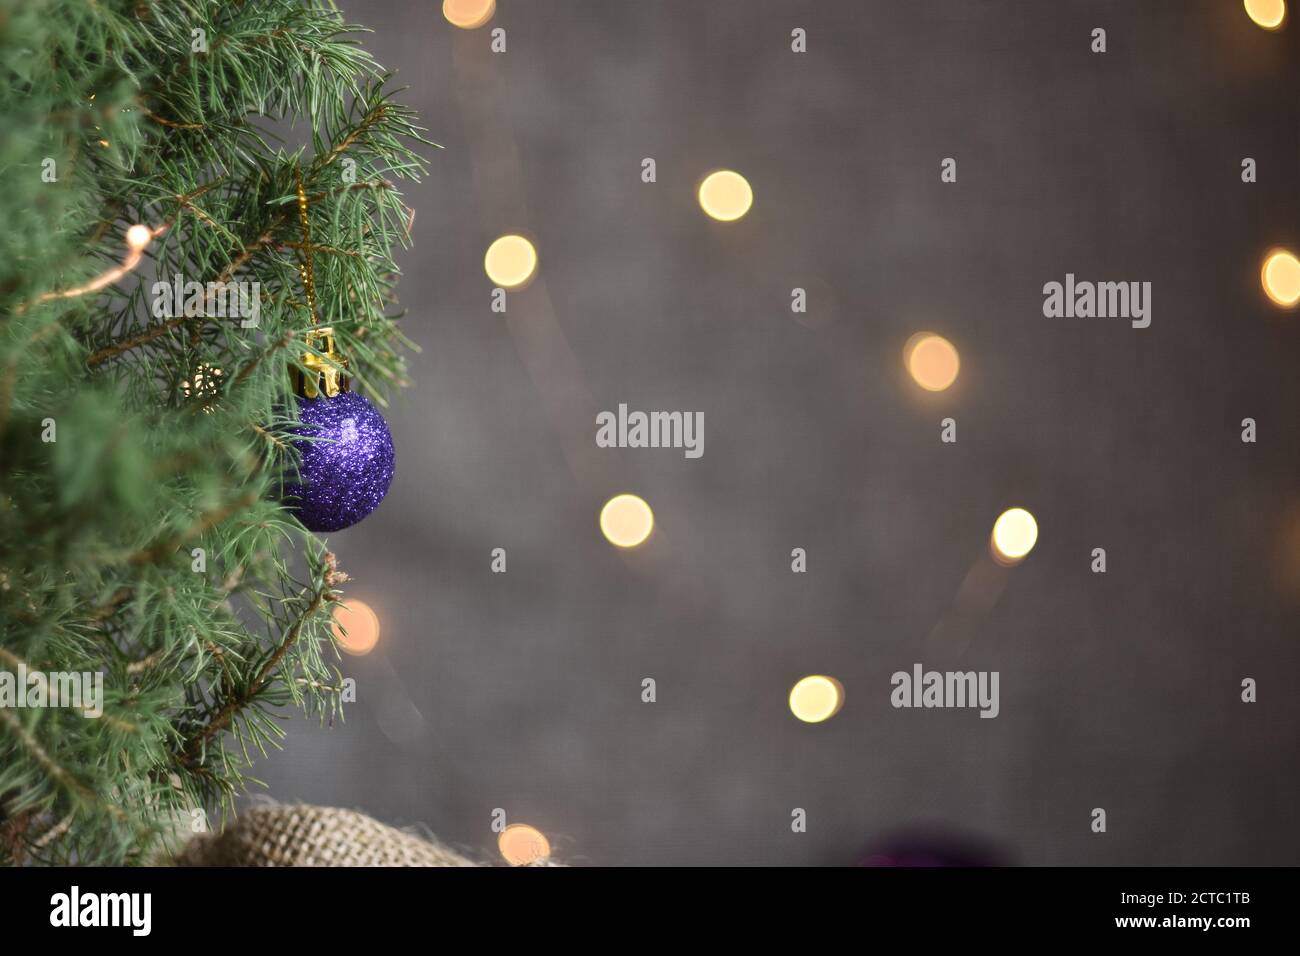 beautiful christmas background with a spruce branch and a ball on a bokeh background of lights Stock Photo